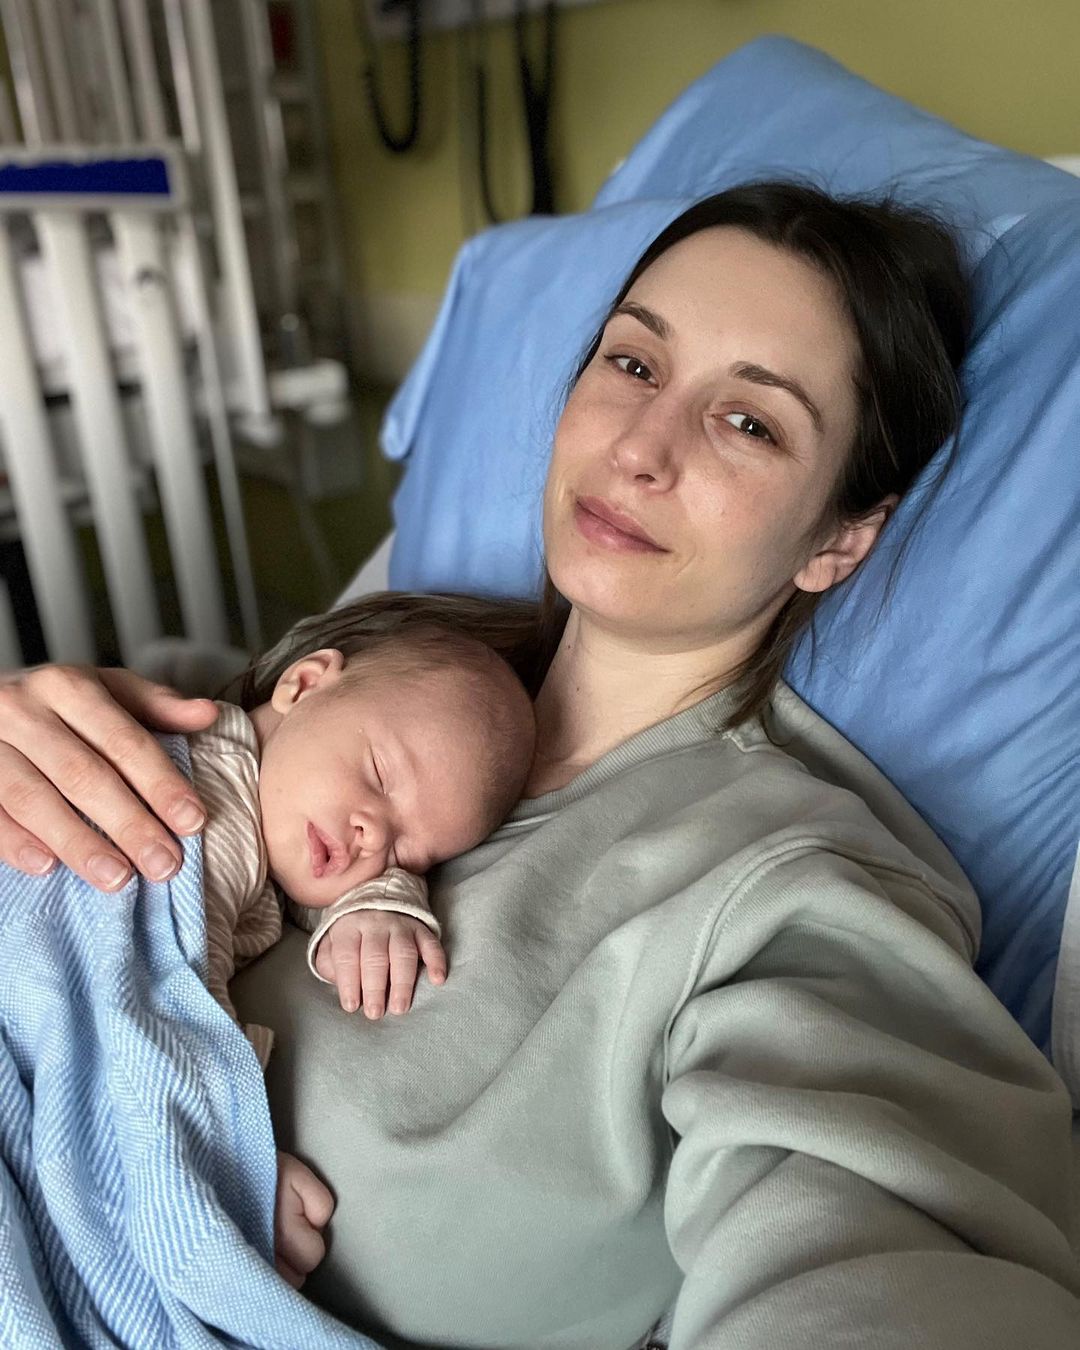 BiP's Kevin Wendt, Astrid Loch's 1-Month-Old Son Is Hospitalized With COVID